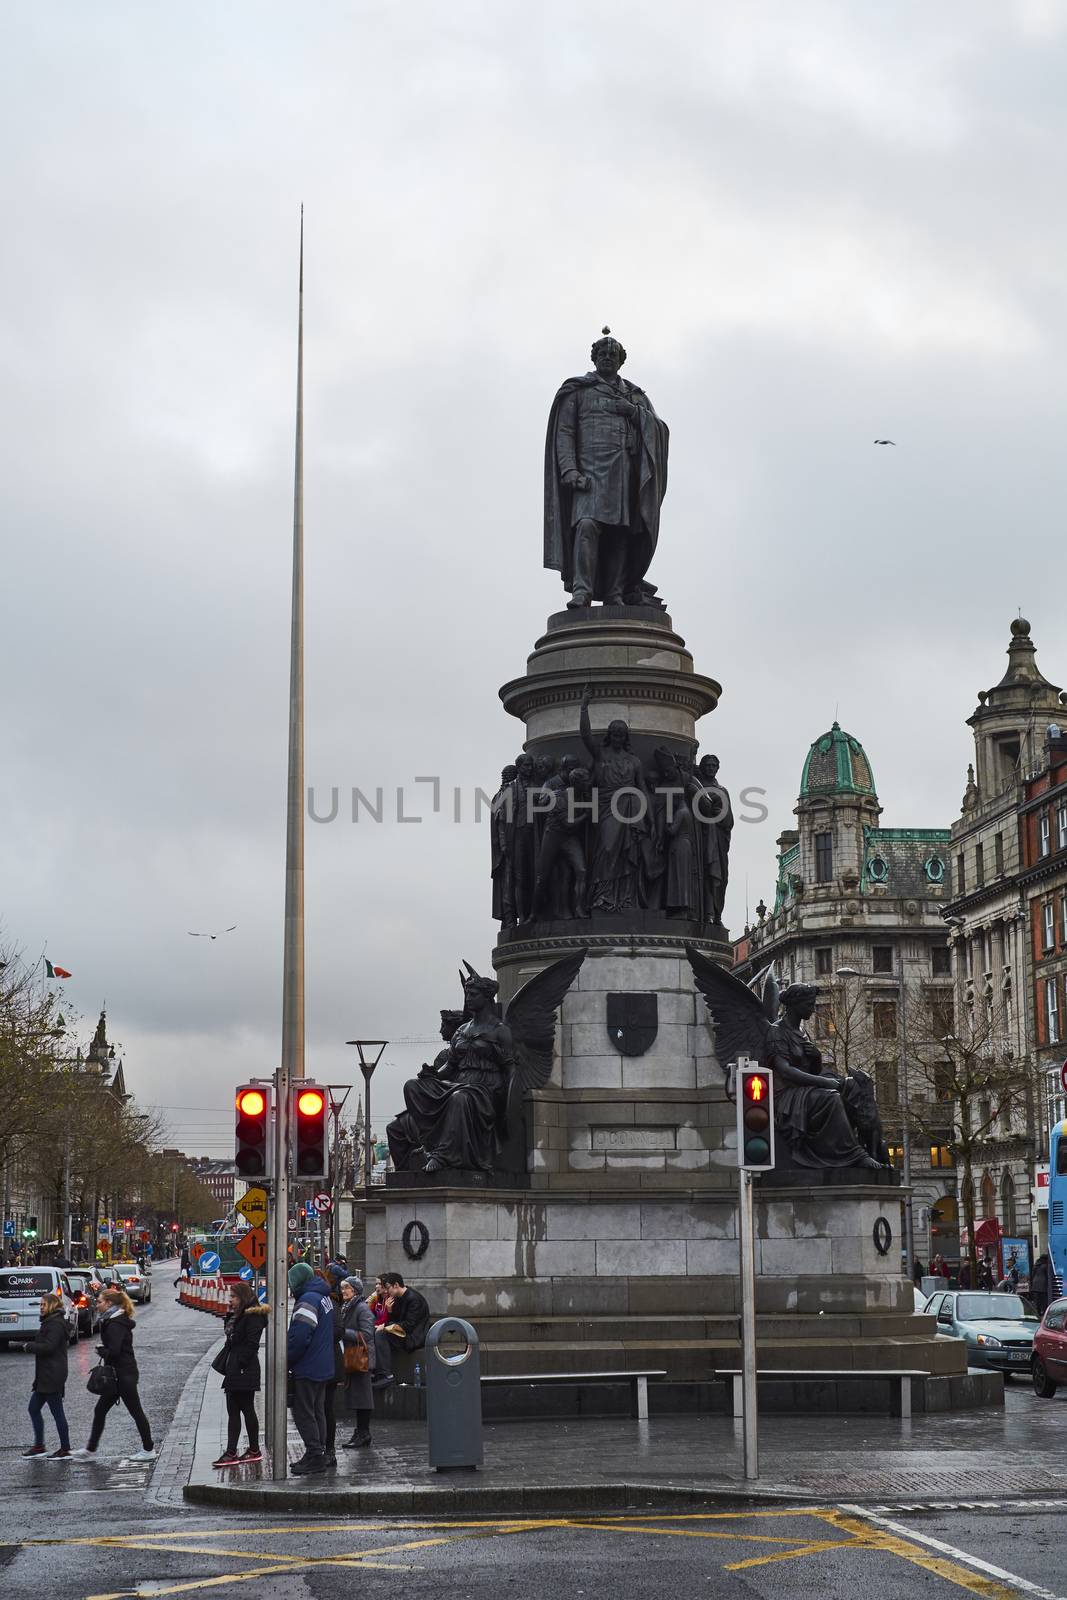 DUBLIN, IRELAND - JANUARY 05: Statue of Daniel O'Connell with overcast sky and Millennium Spire in the background. January 05, 2016 in Dublin